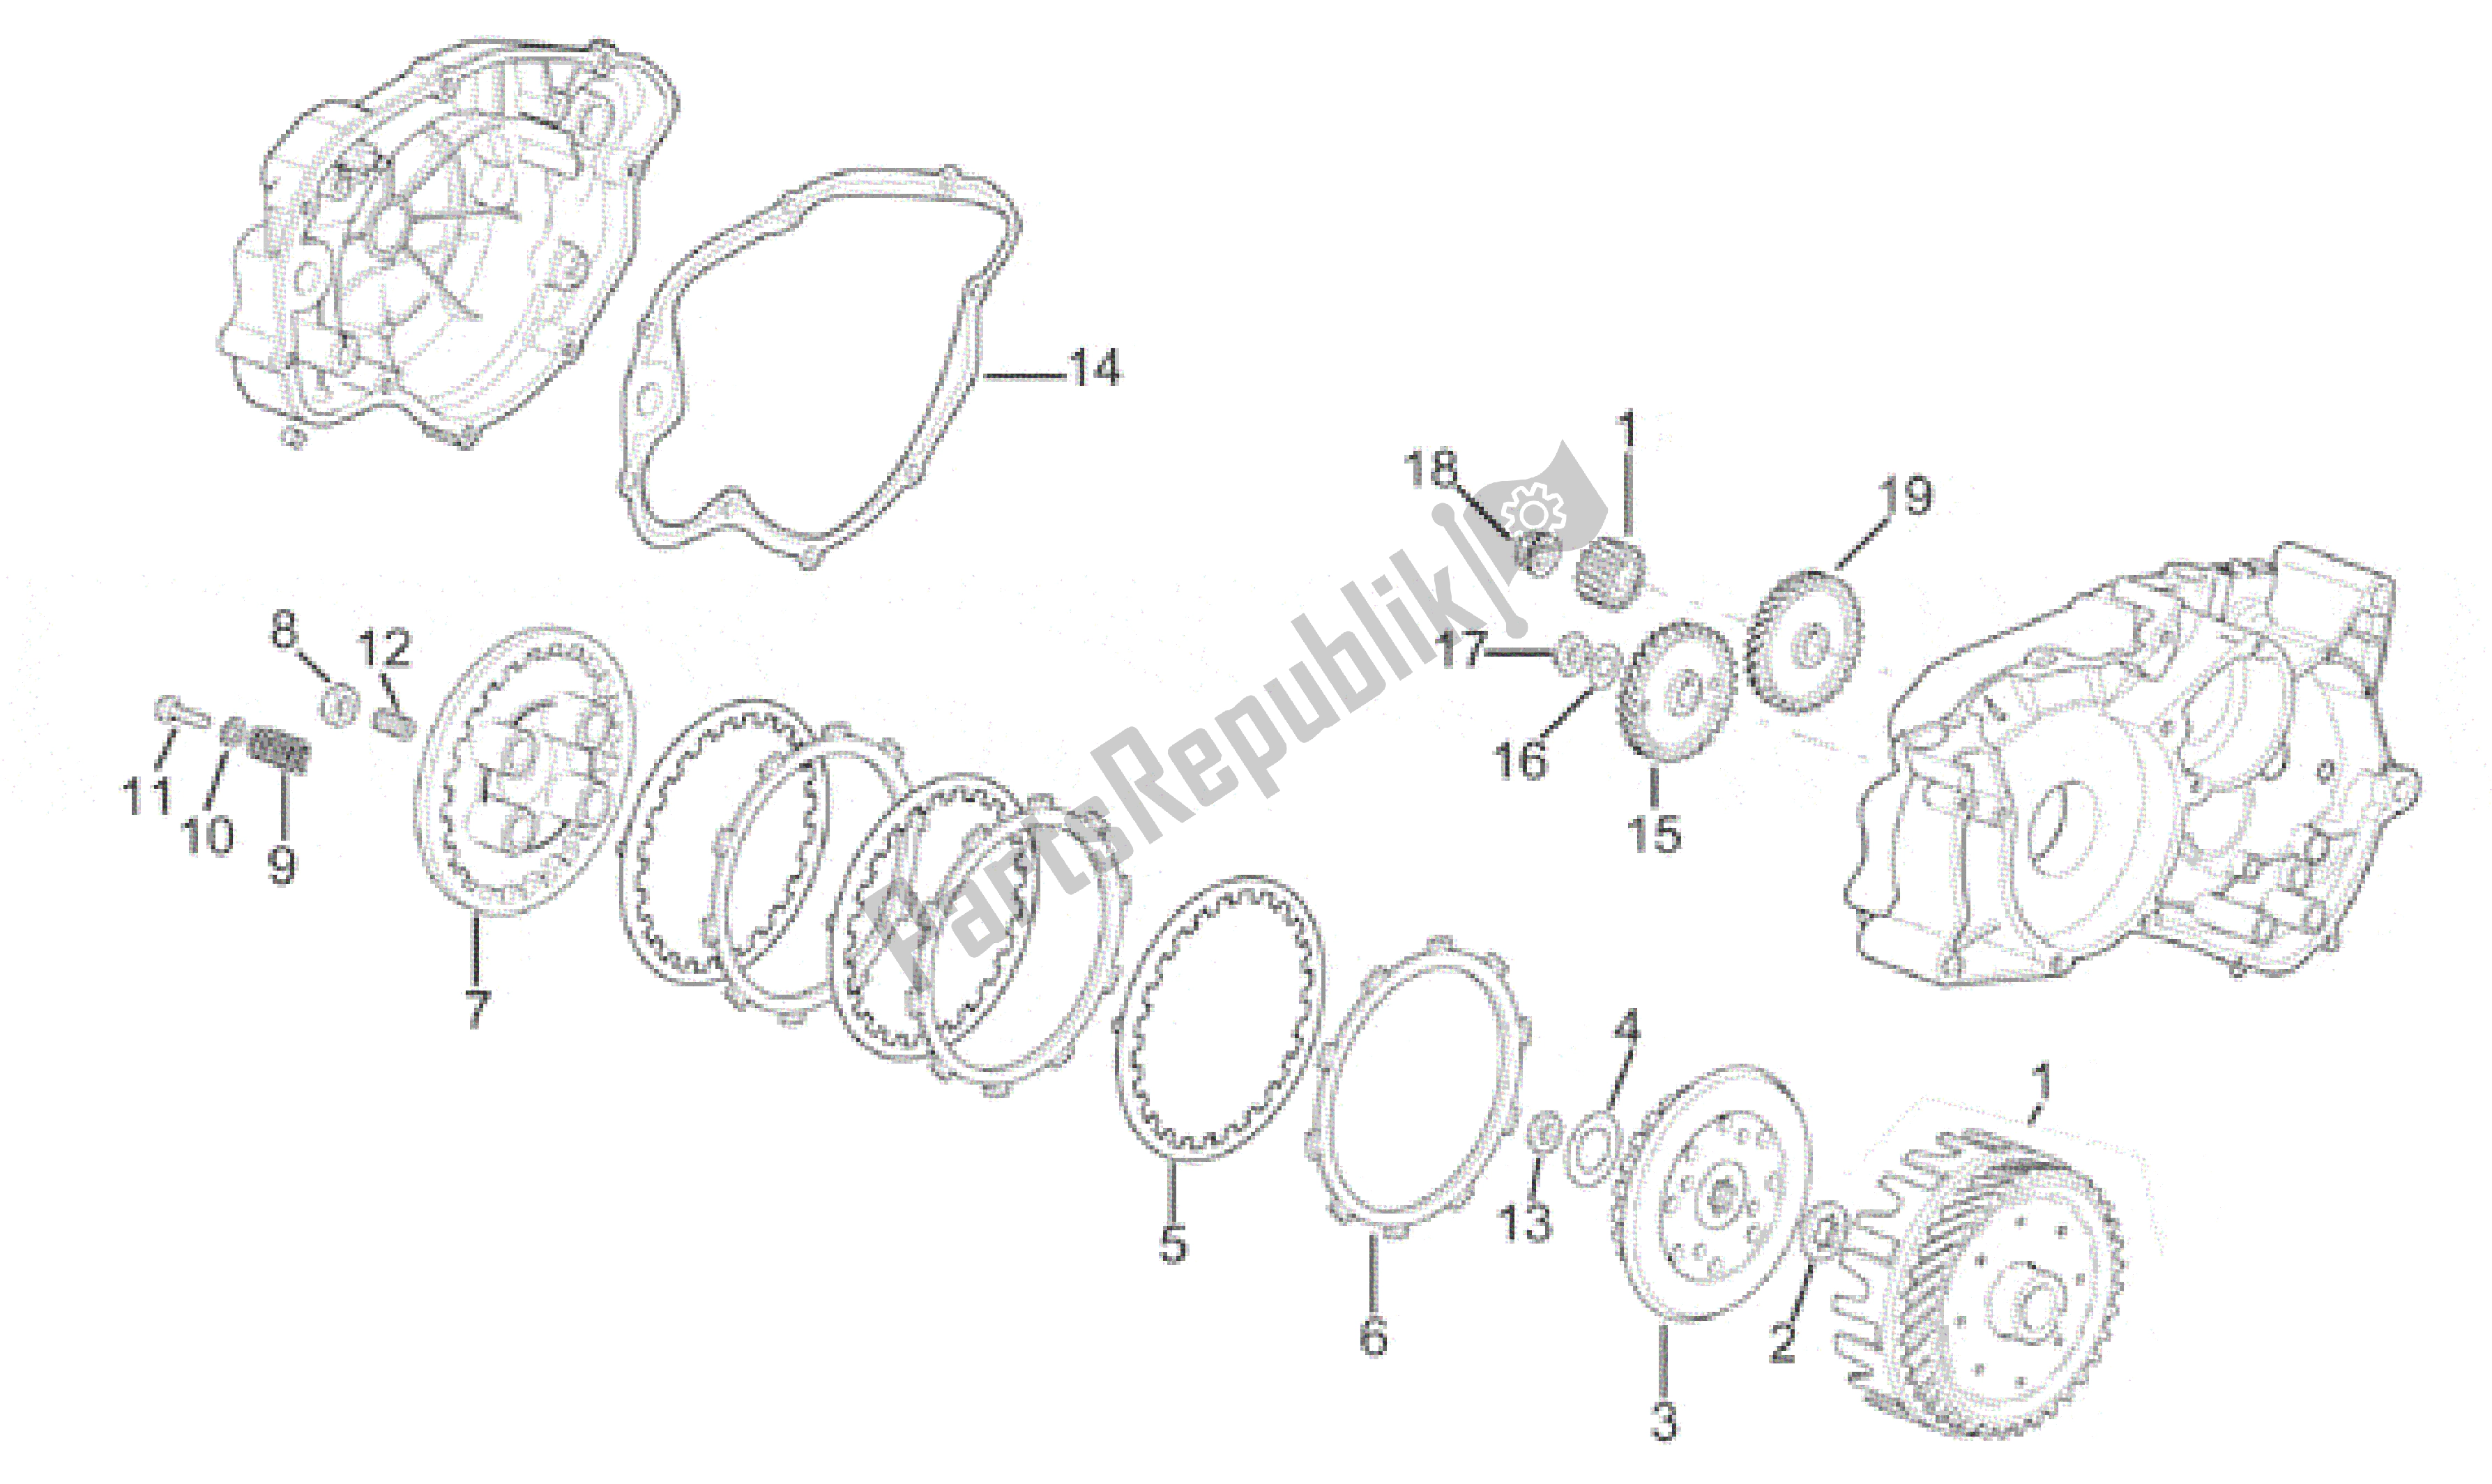 All parts for the Clutch of the Aprilia RS 50 1996 - 1998